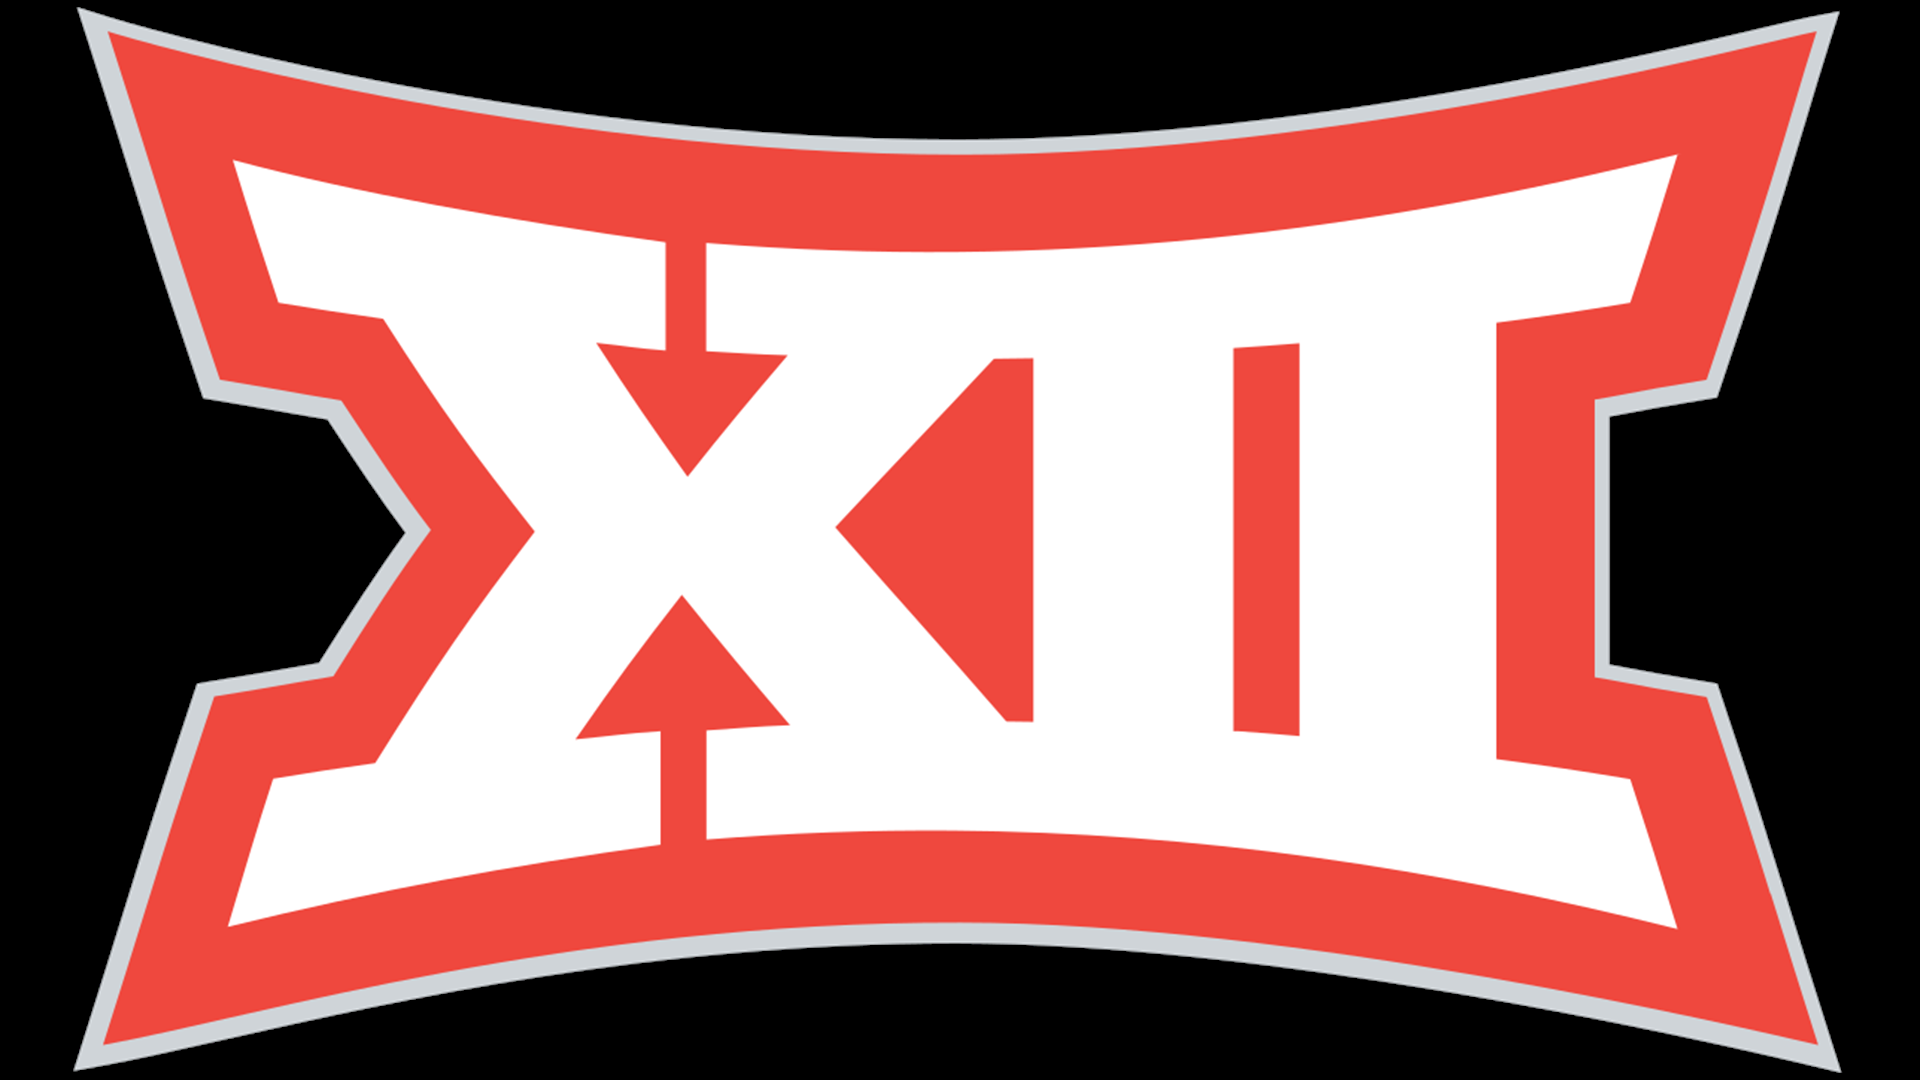 The Big 12 conference voted Tuesday that they will continue the fall 2020 football season